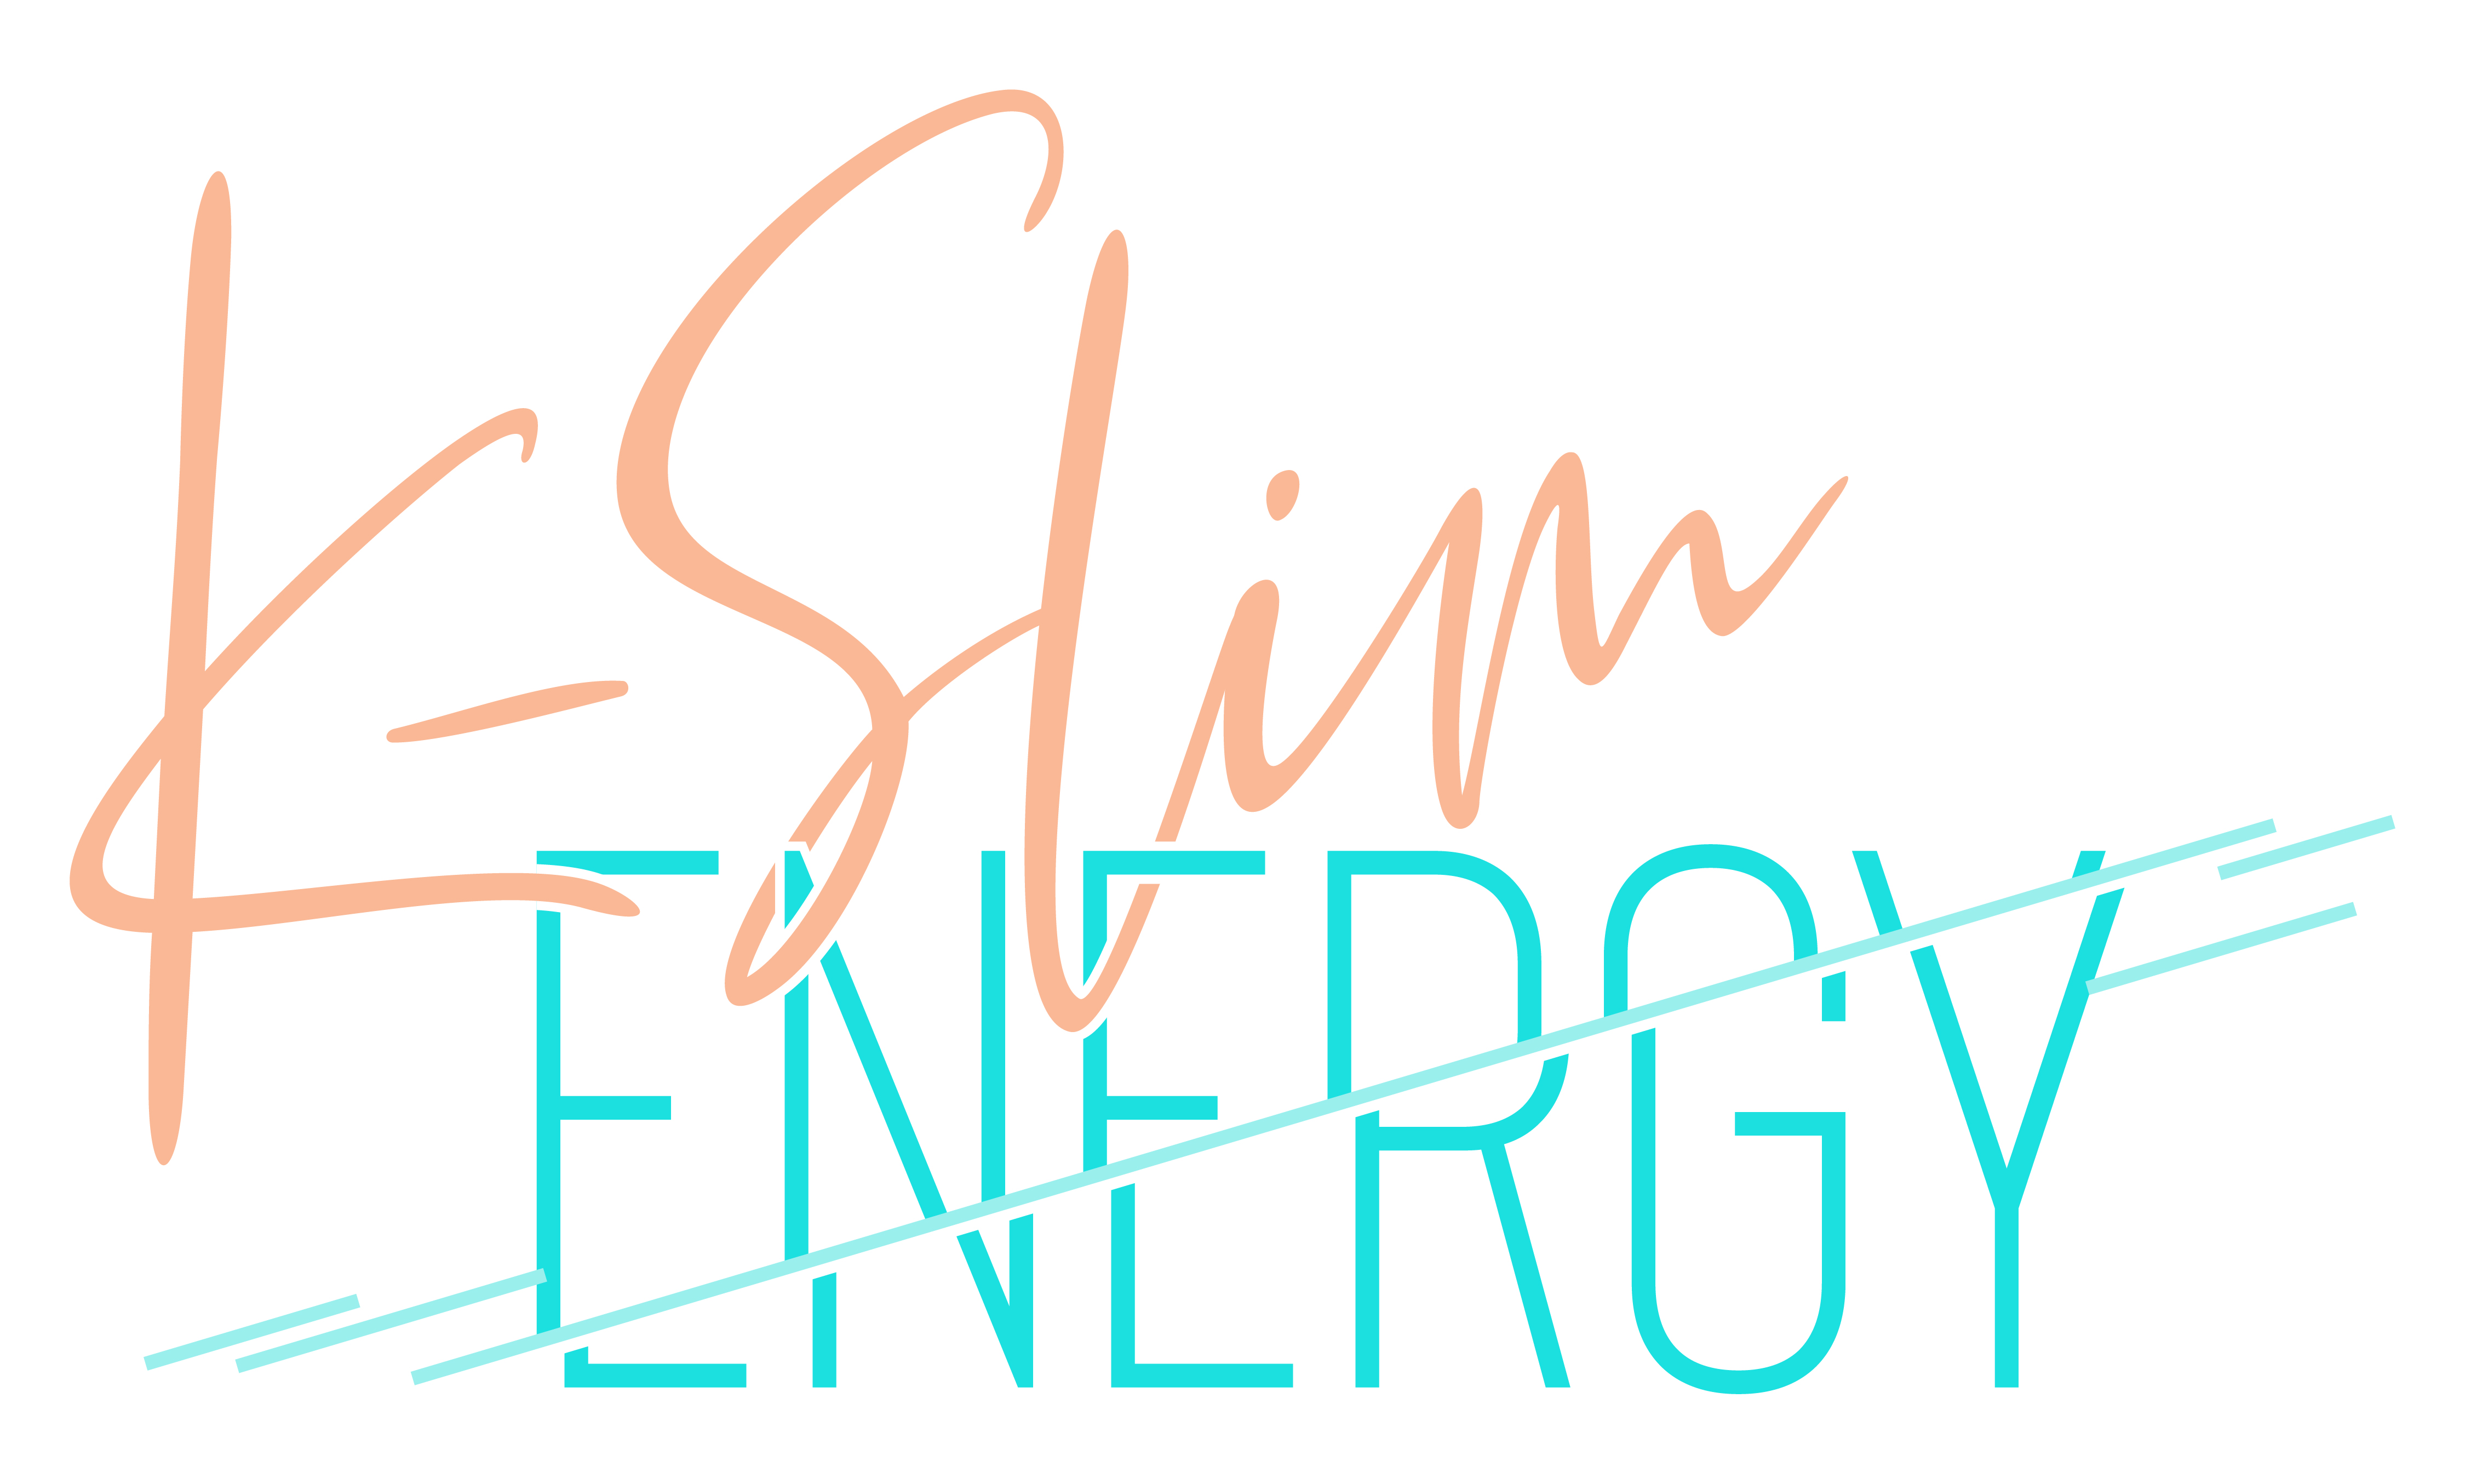 New Keto Diet-Friendly Nutritional Drink "K-Slim Energy" Announces Crowdfunding Campaign to Support New Product Launch